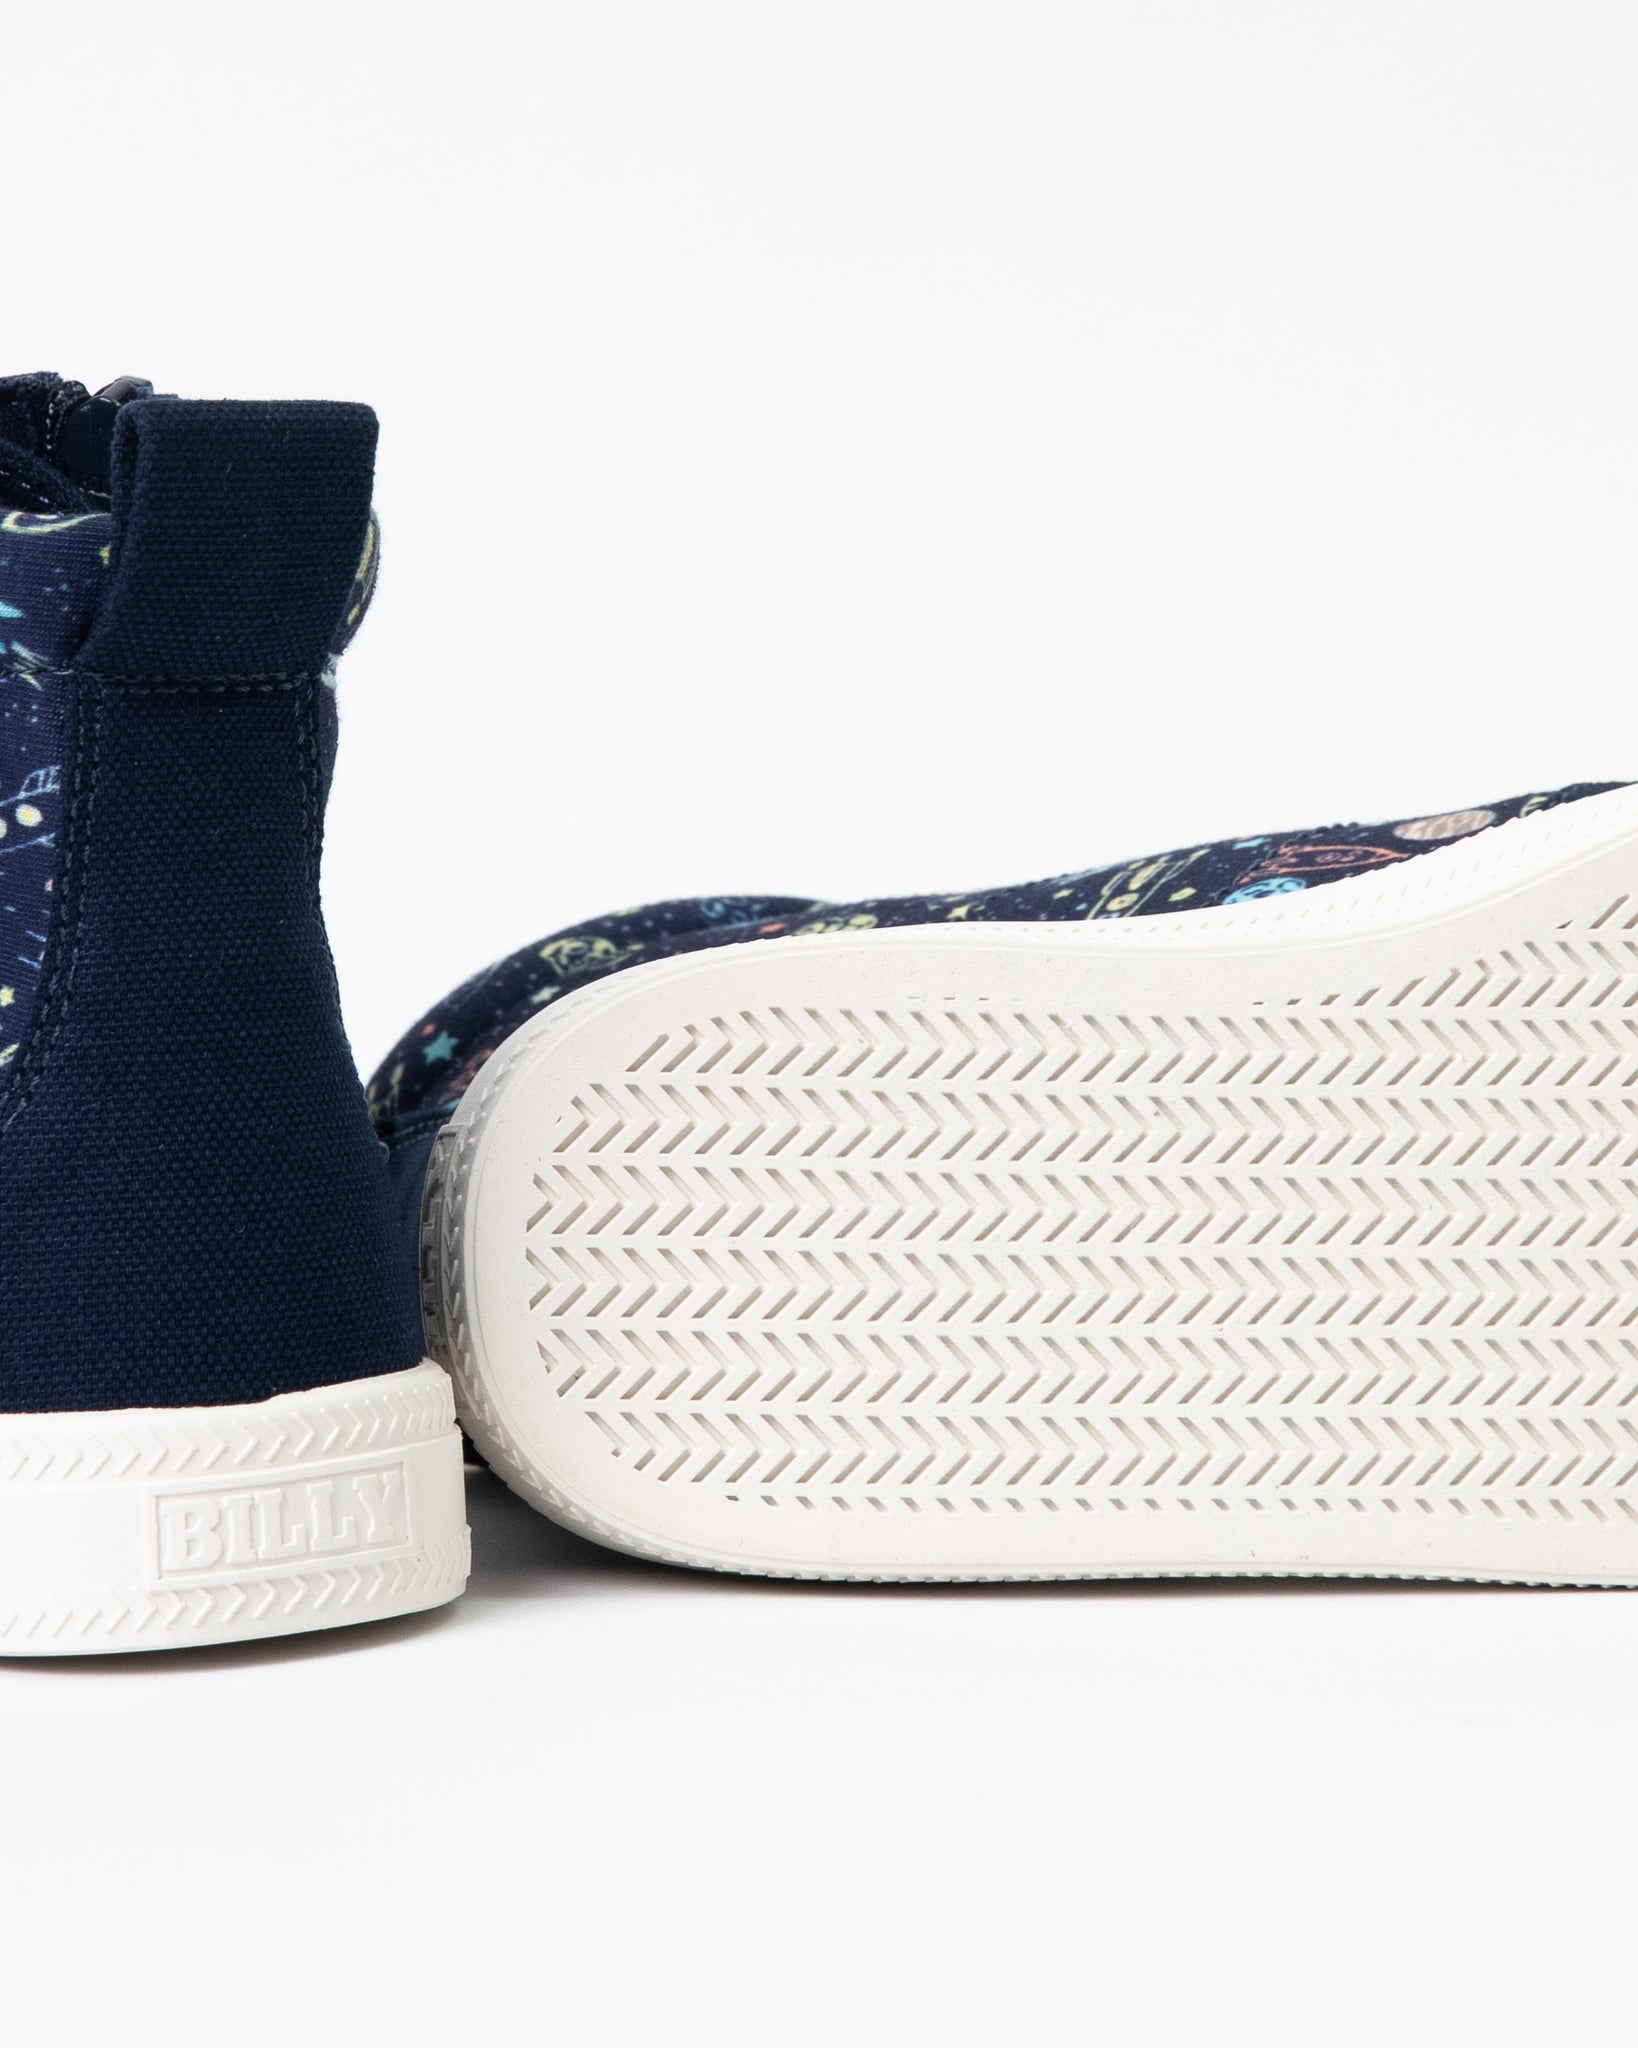 Classic High Top (Toddler) - Navy Space